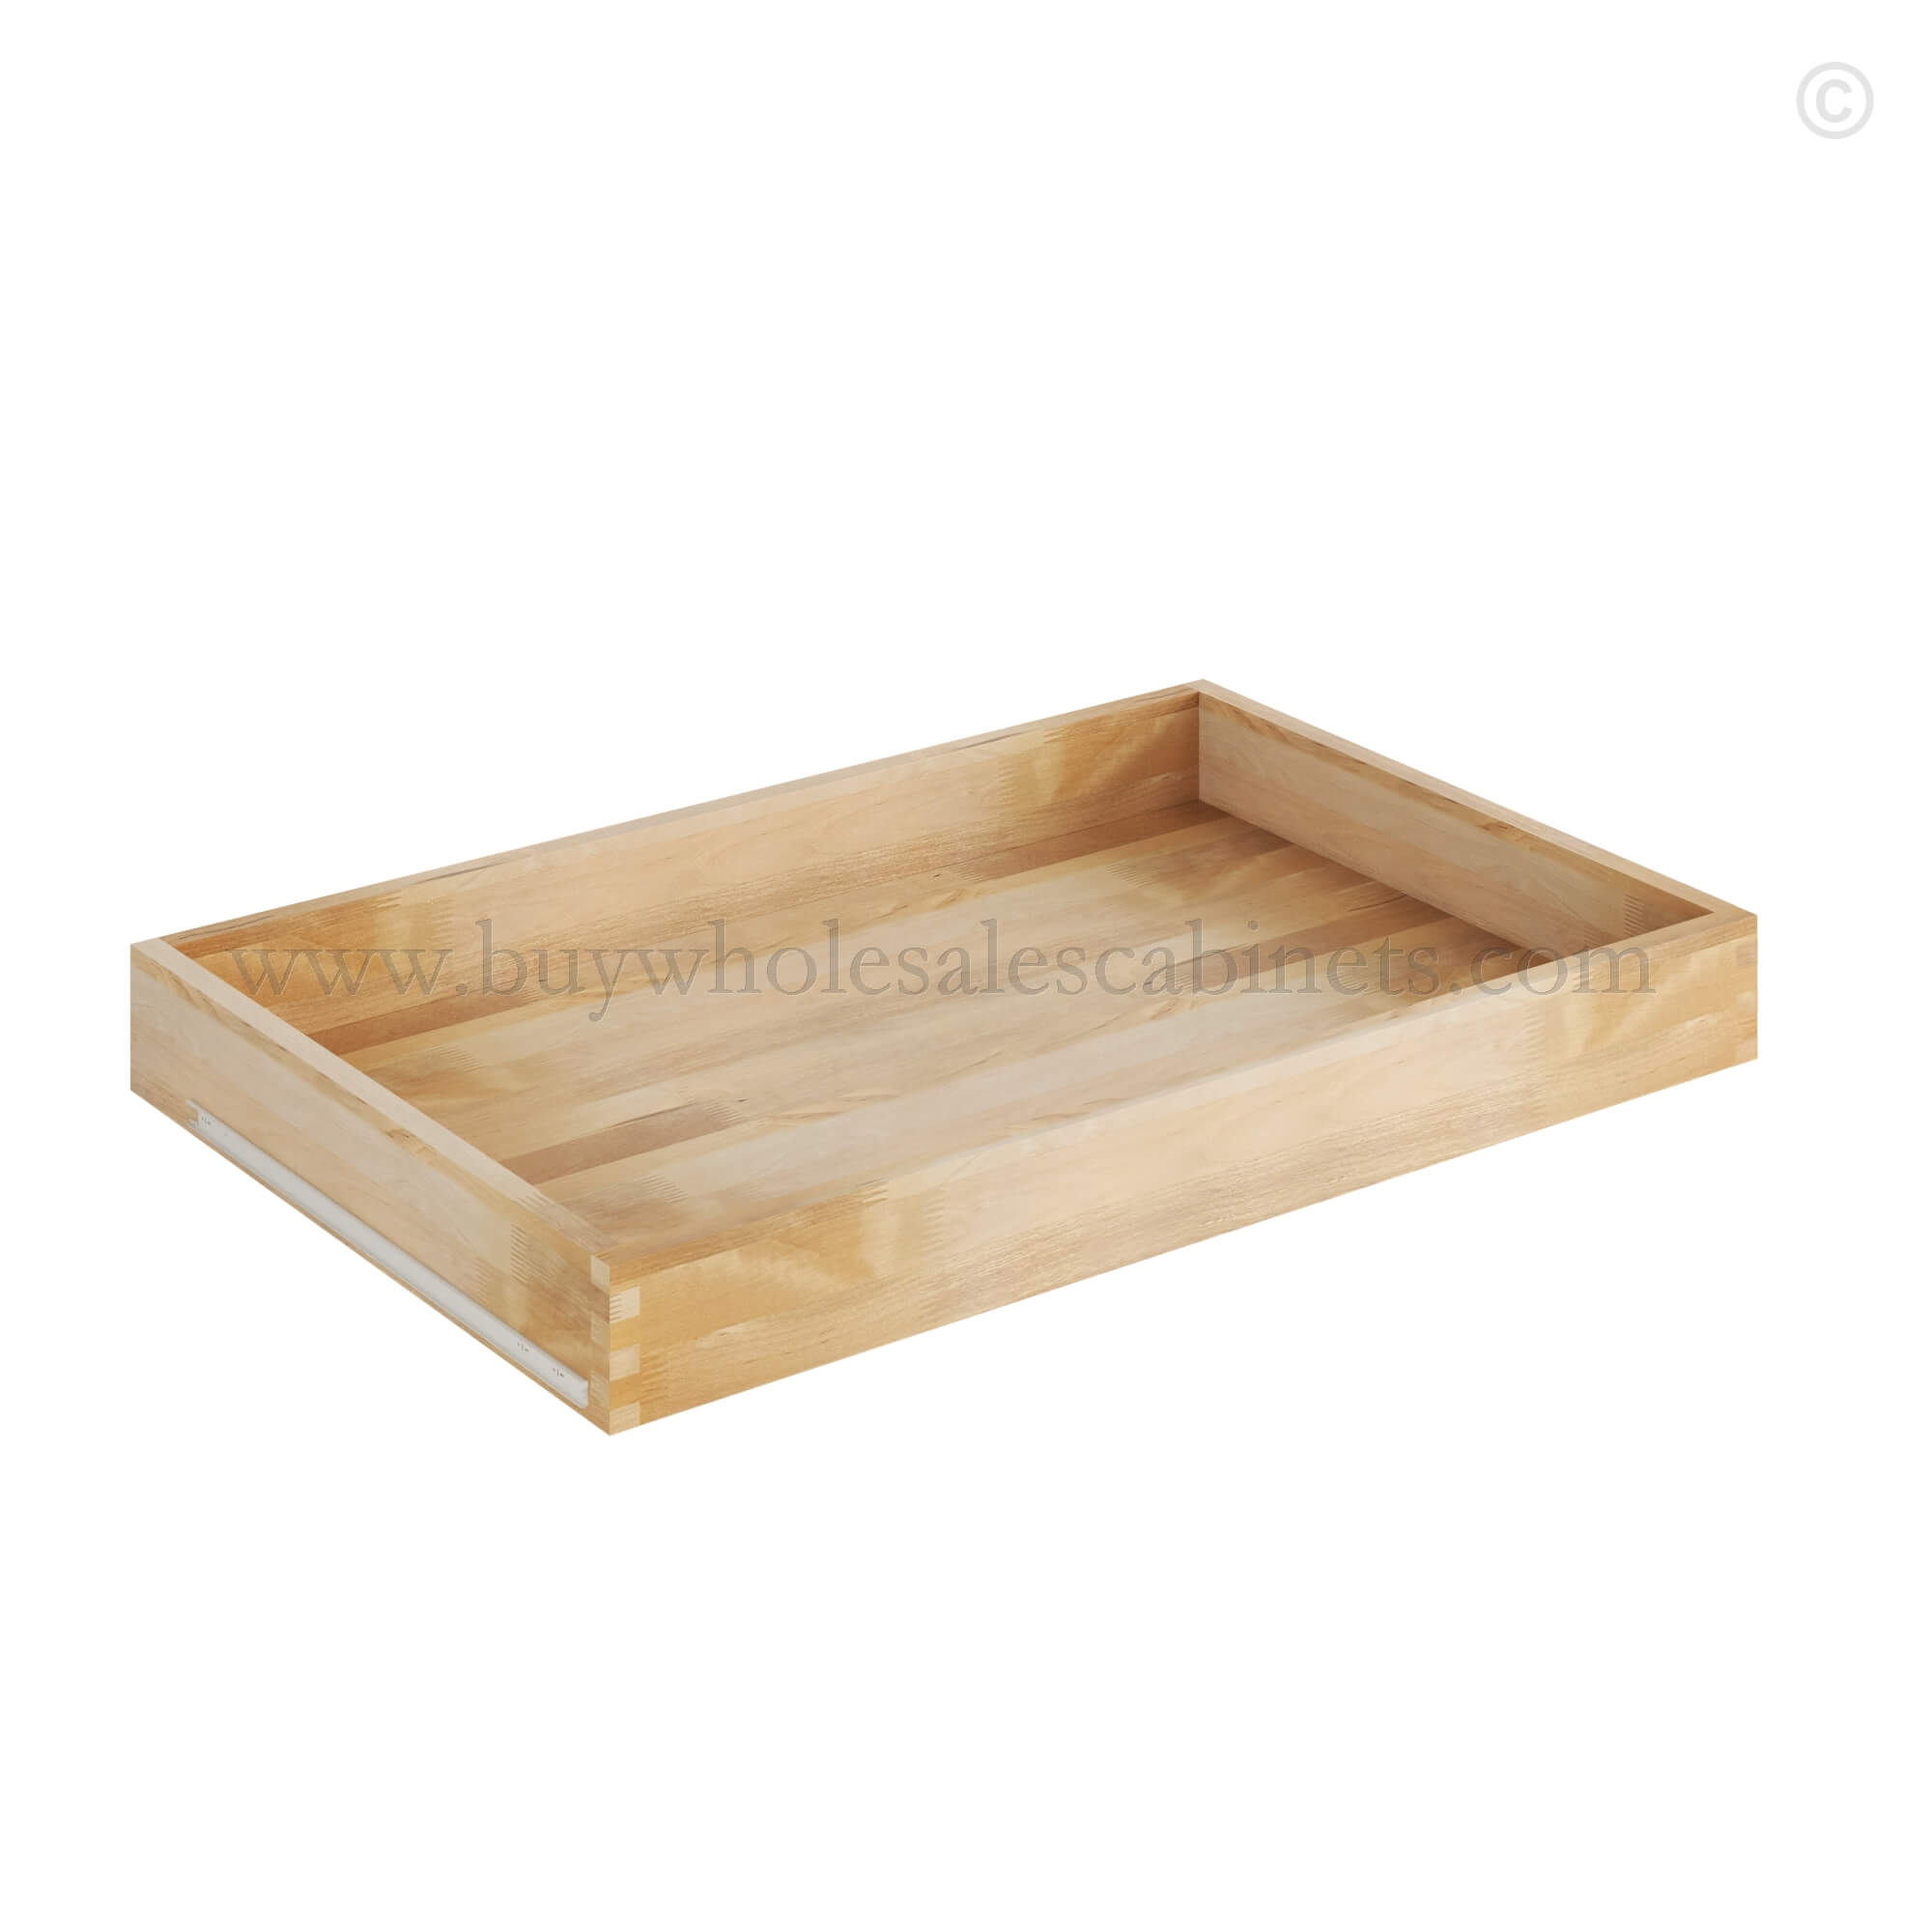 Slim Oak Roll Out Tray, rta cabinets, wholesale cabinets